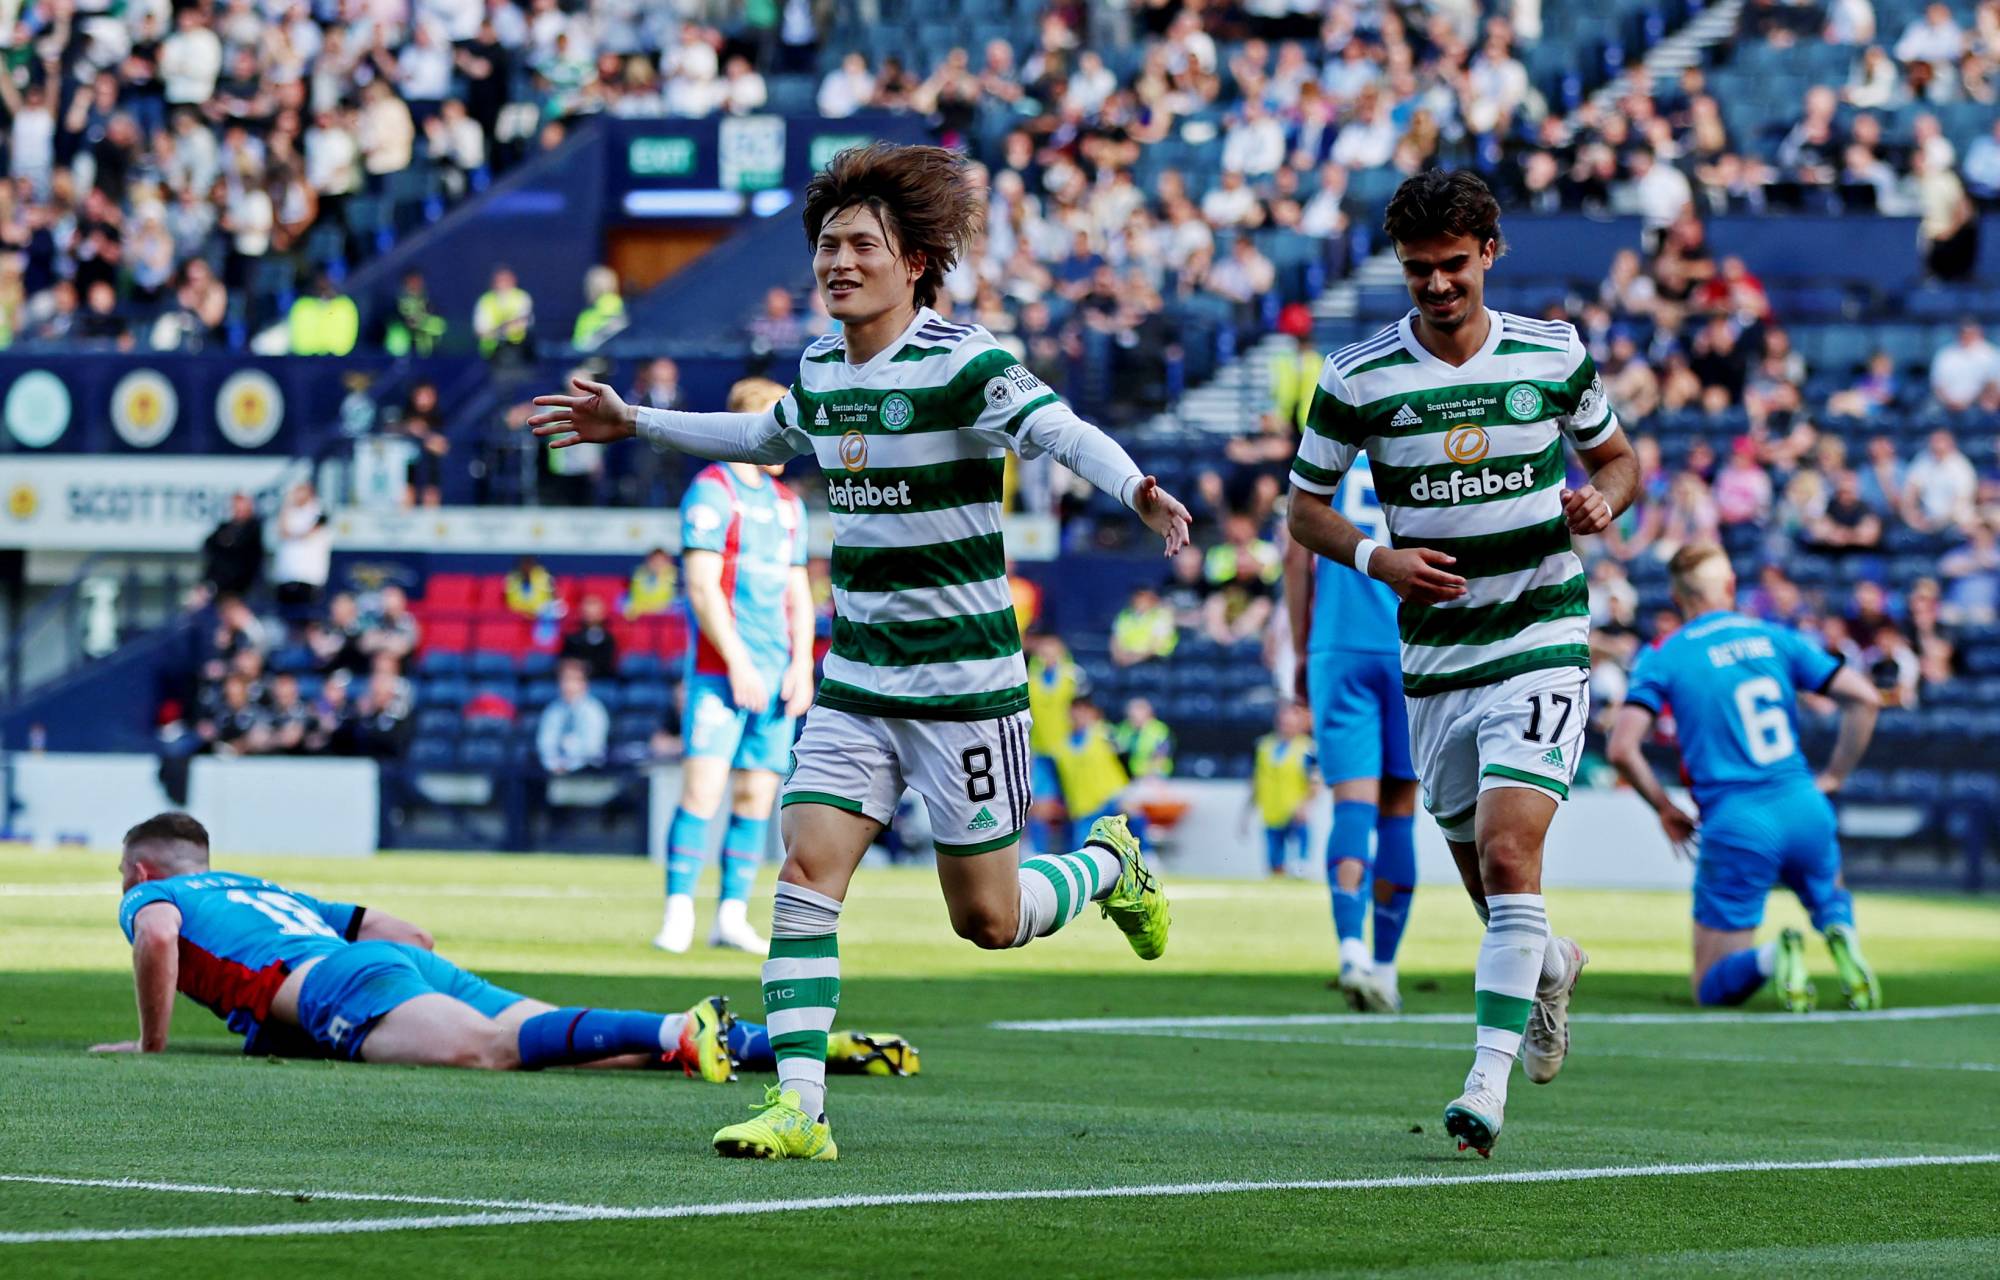 Celtic complete domestic treble by winning Scottish Cup